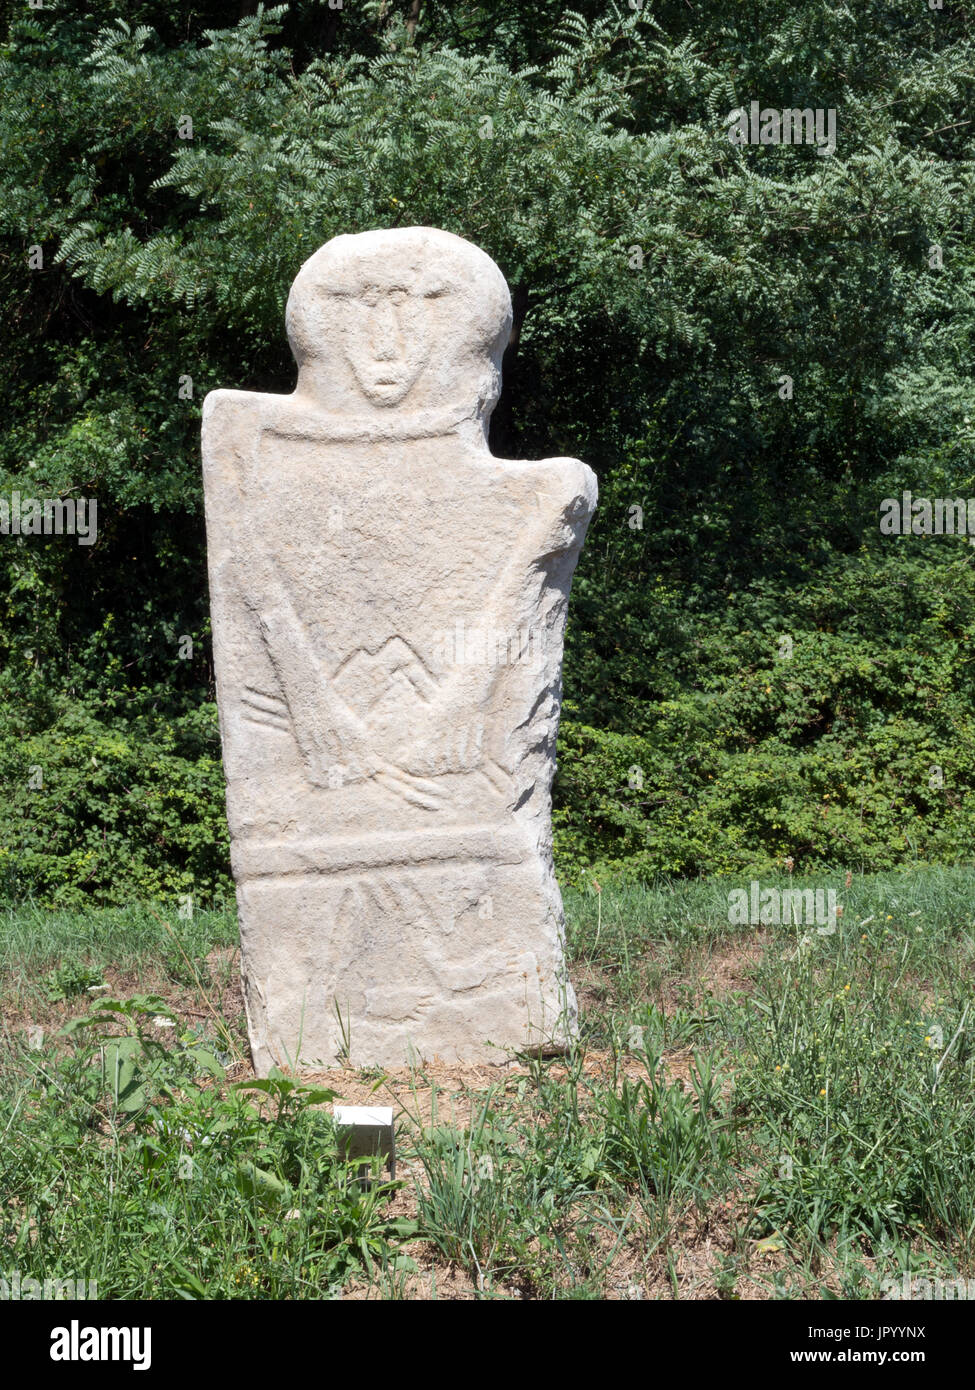 Statua stele - Lunigiana, Italy. Replica example of ancient carved stones, typical of the area. Stock Photo